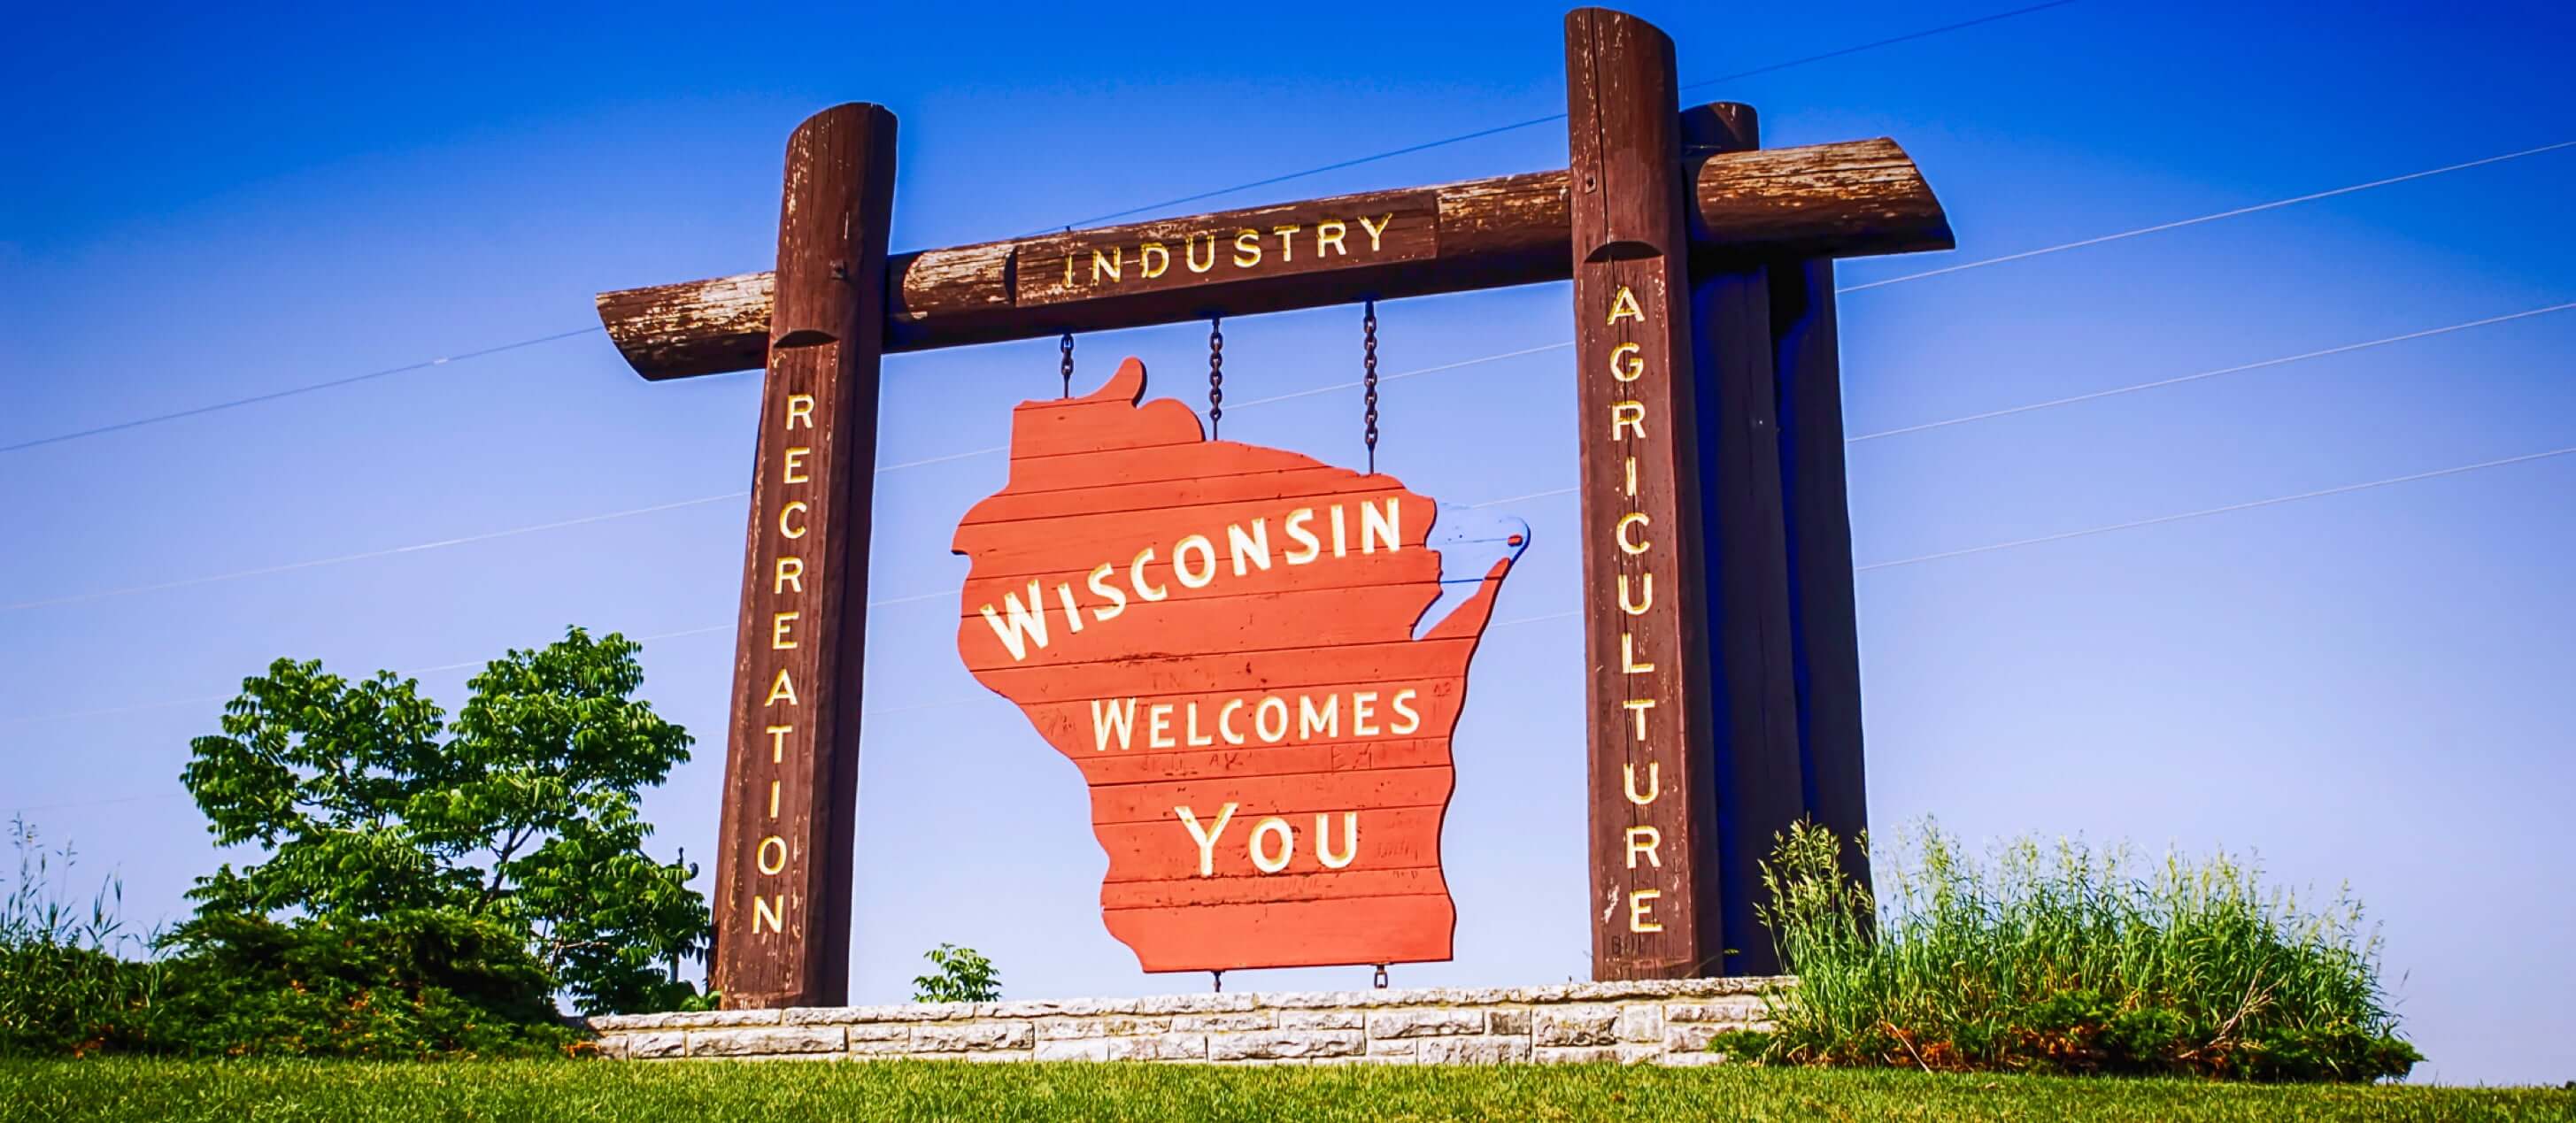 Image of "Wisconsin Welcomes You" written on sign